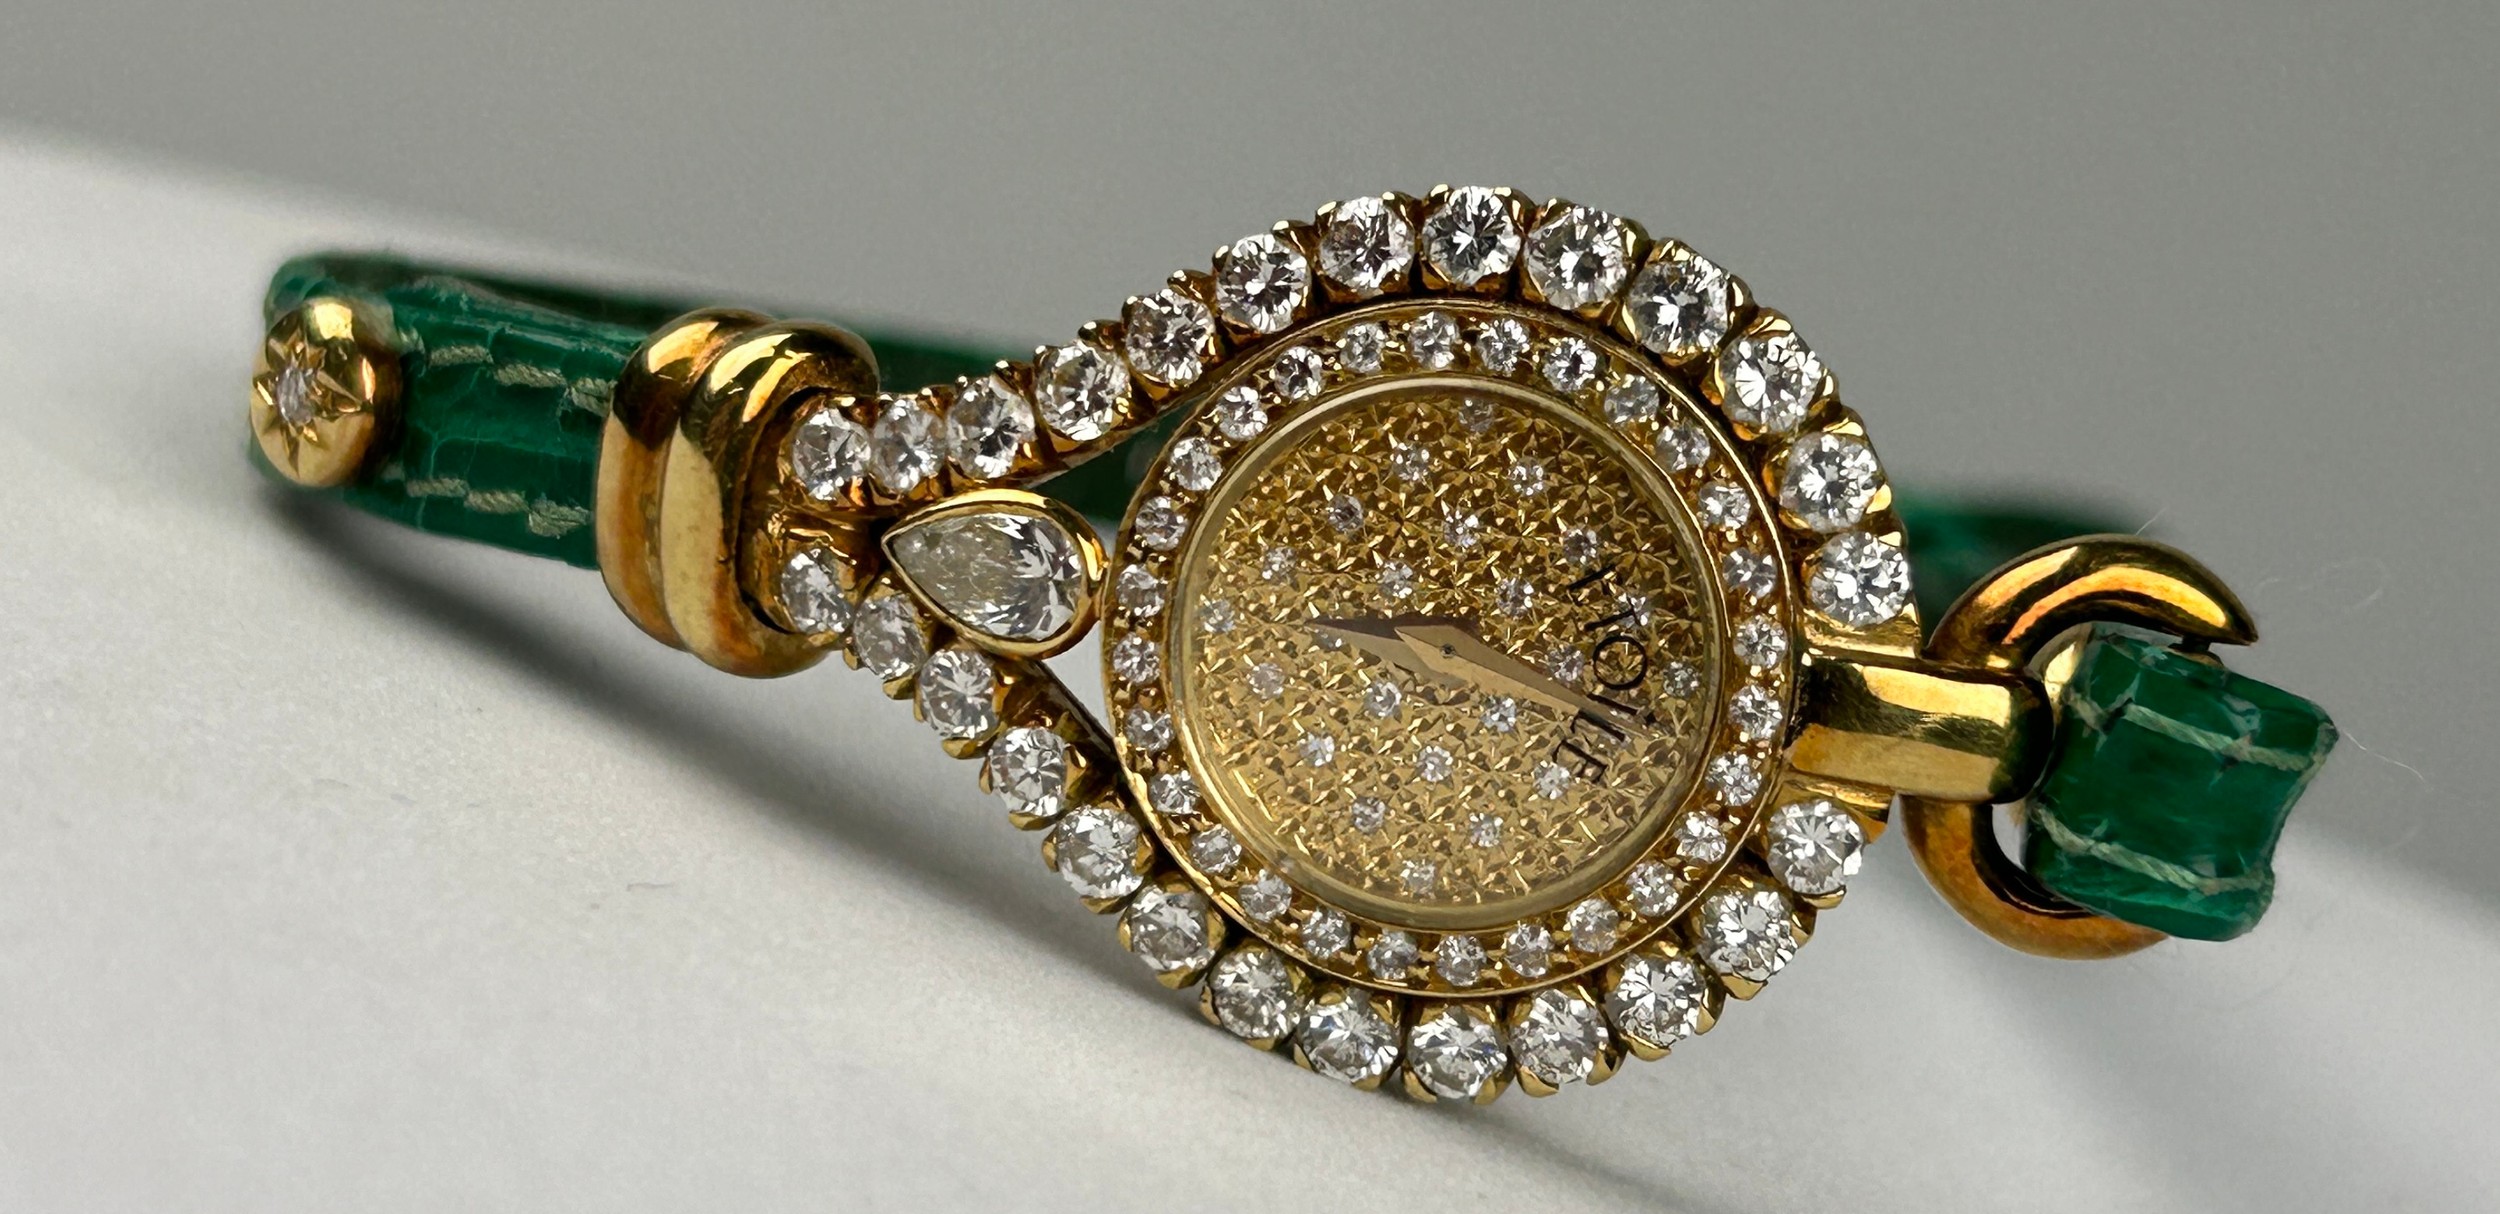 A DIAMOND ETOILE WATCH APPROXIMATELY THREE CARATS IN 14CT GOLD WITH GREEN LEATHER STRAP, - Image 3 of 5